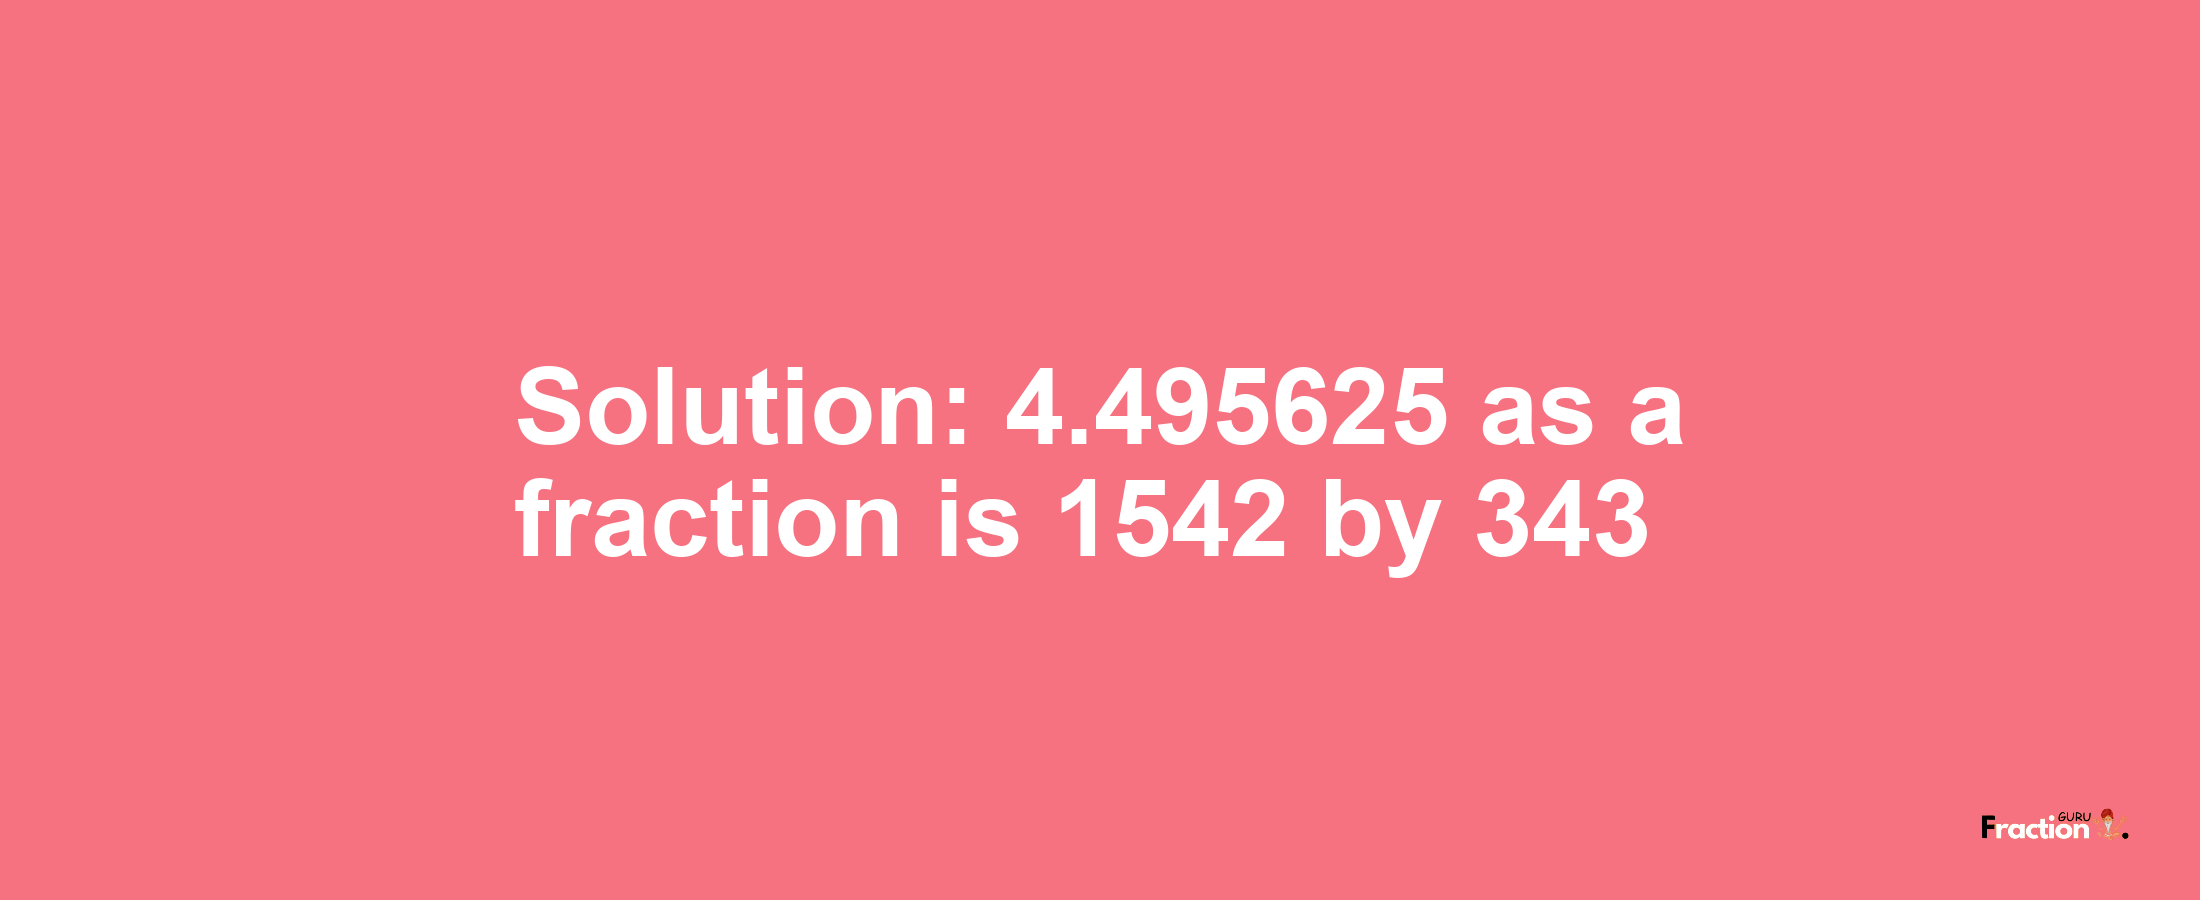 Solution:4.495625 as a fraction is 1542/343